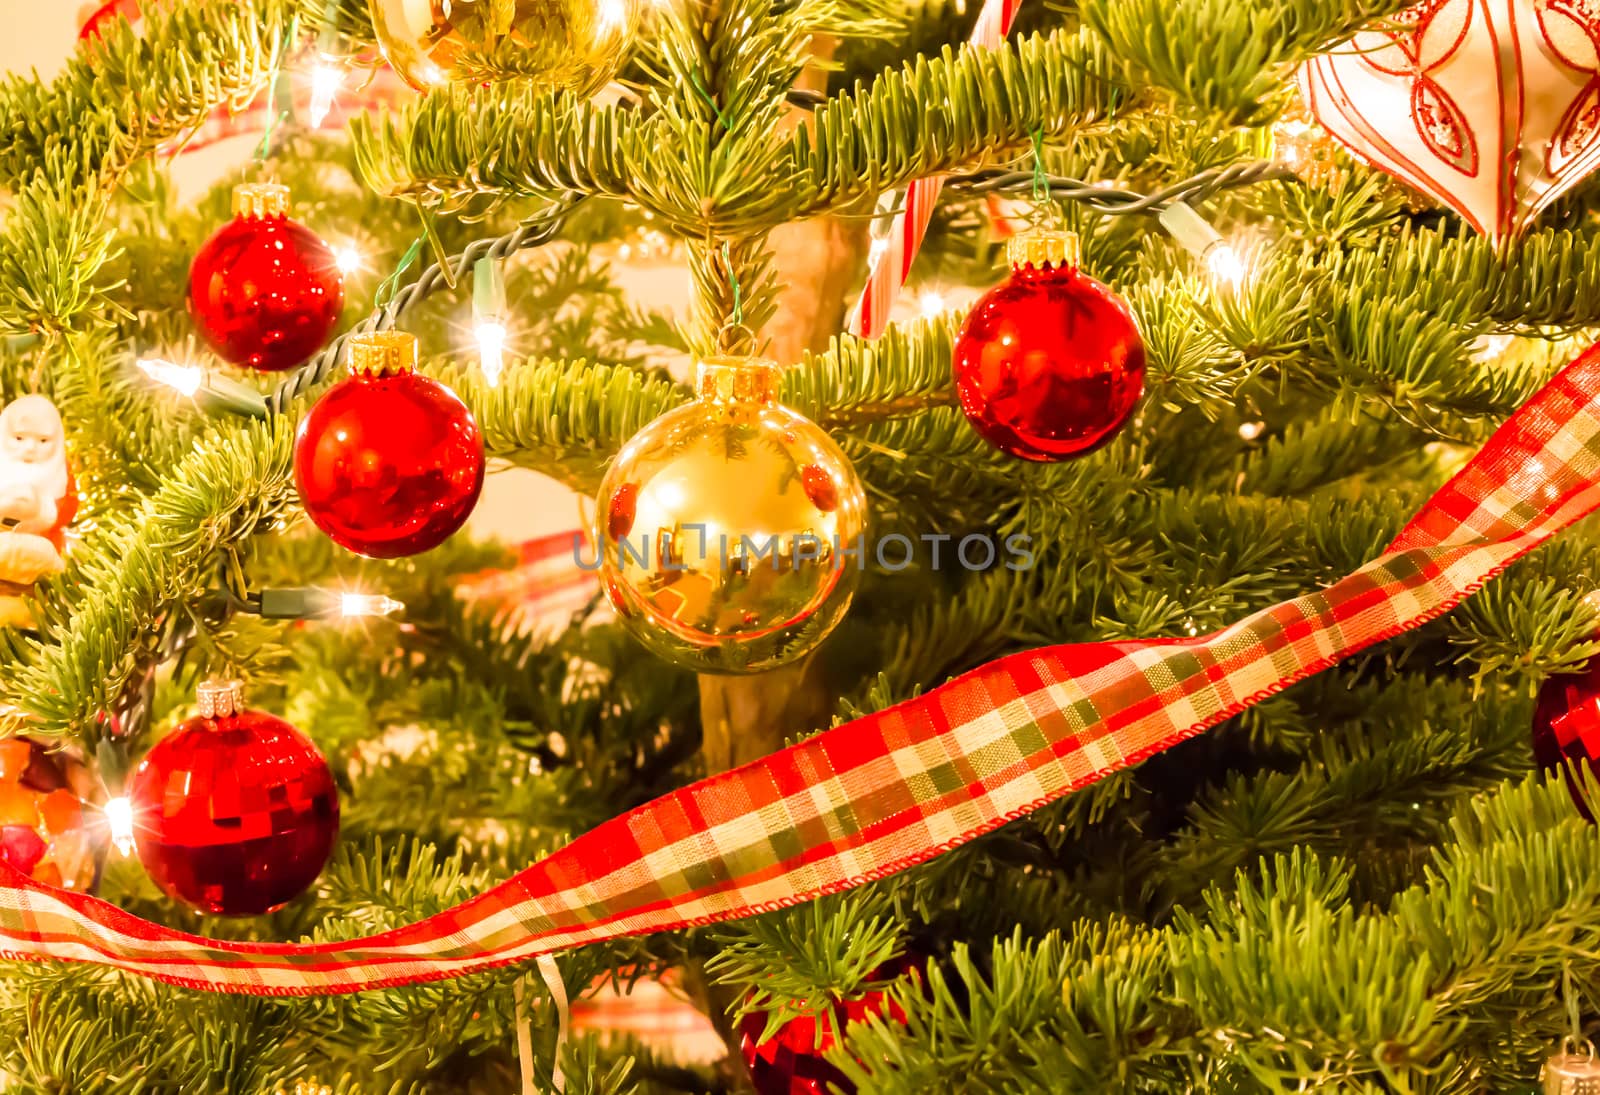 Beautiful Christmas Ornaments Hanging on a Pine Tree